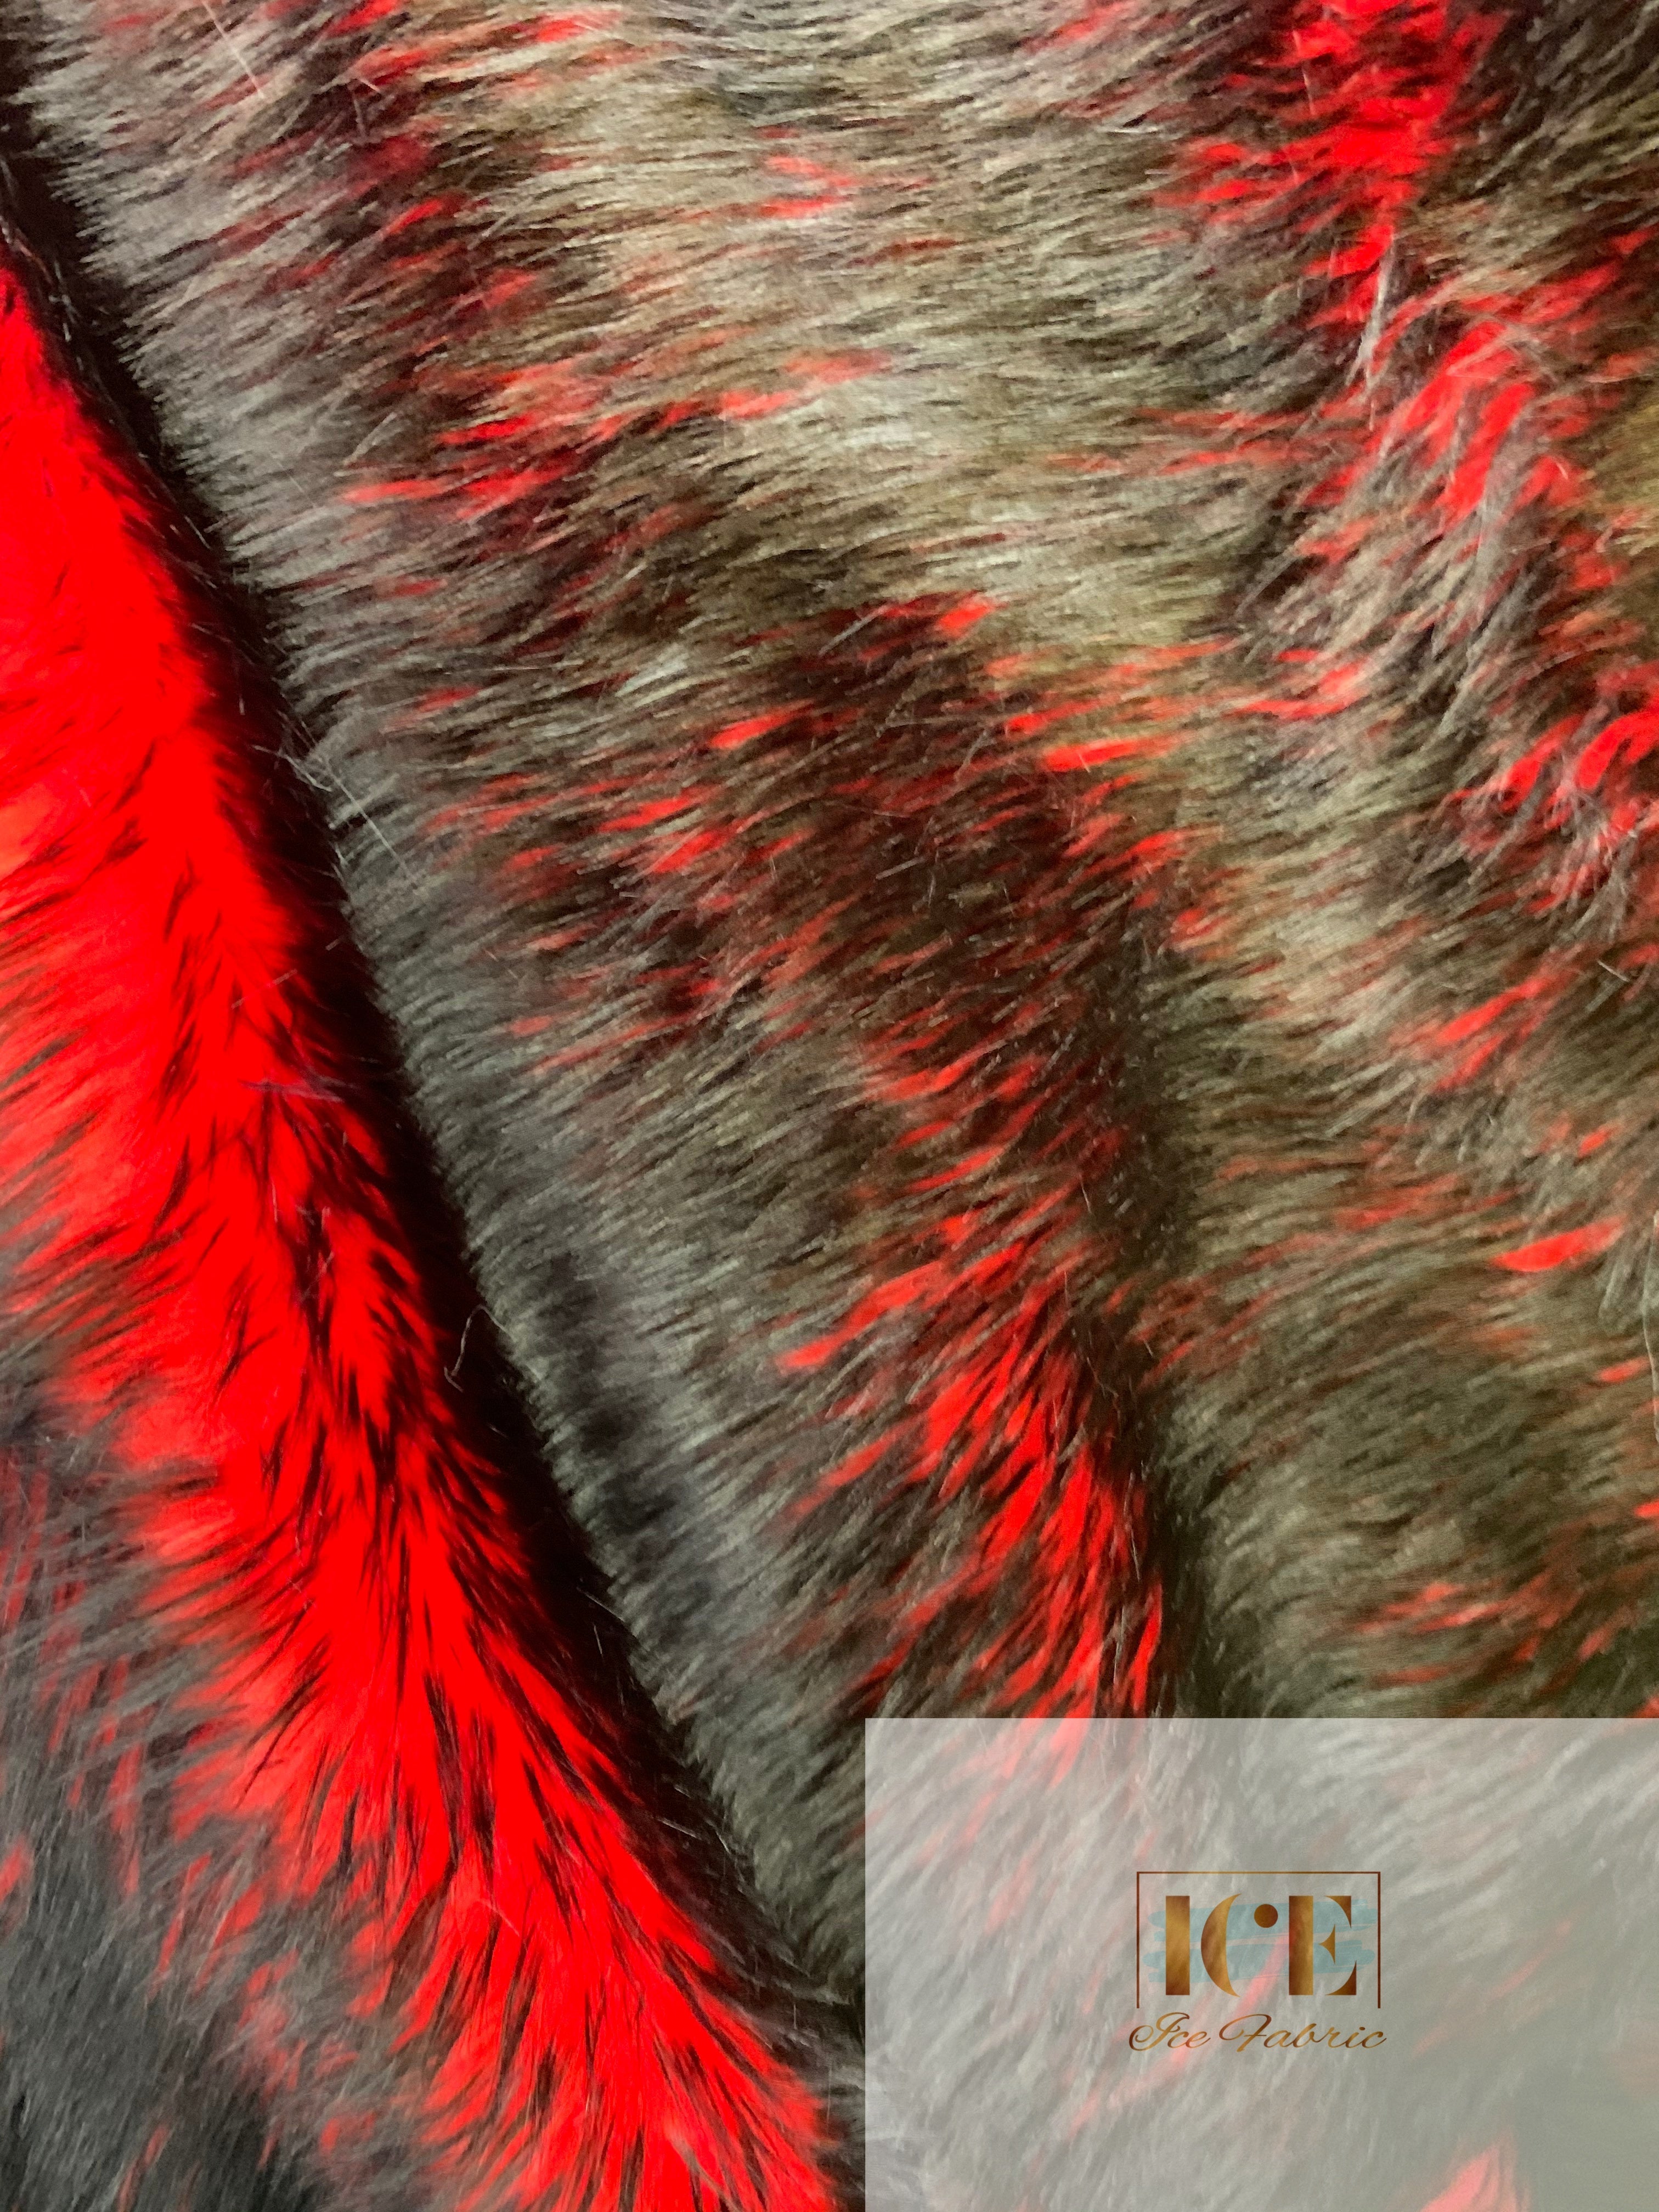 Fox Canadian Brown and White Faux Fur Fabric / Fur Material